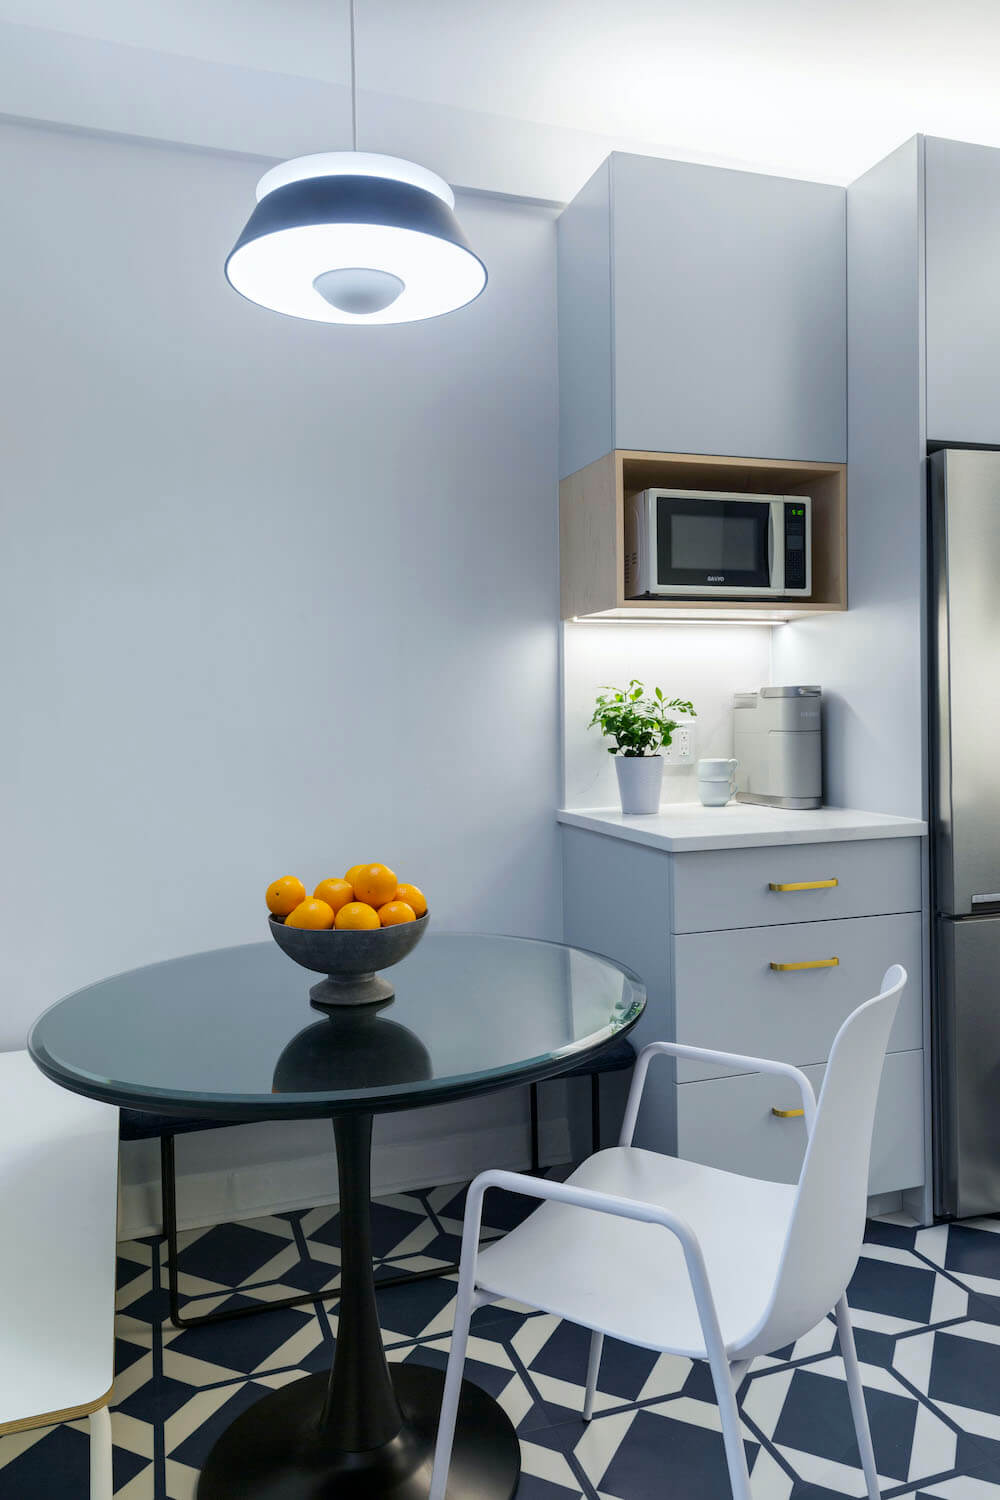 Image of a renovated kitchen with eat-in nook